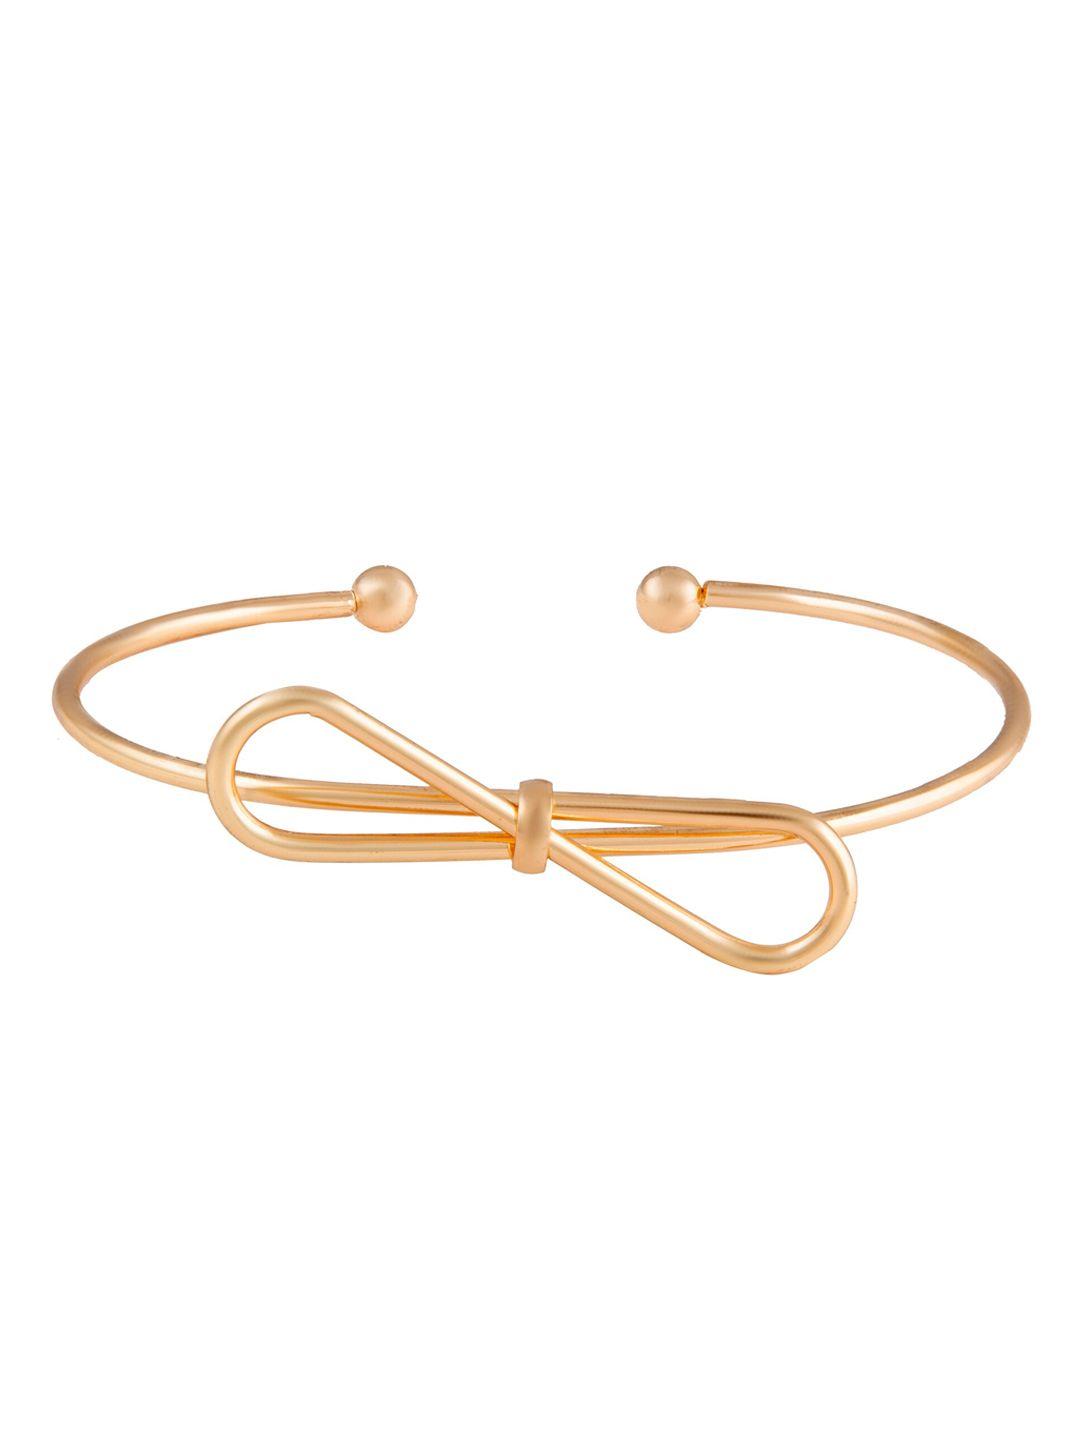 moon dust rose gold-plated cuff bracelet